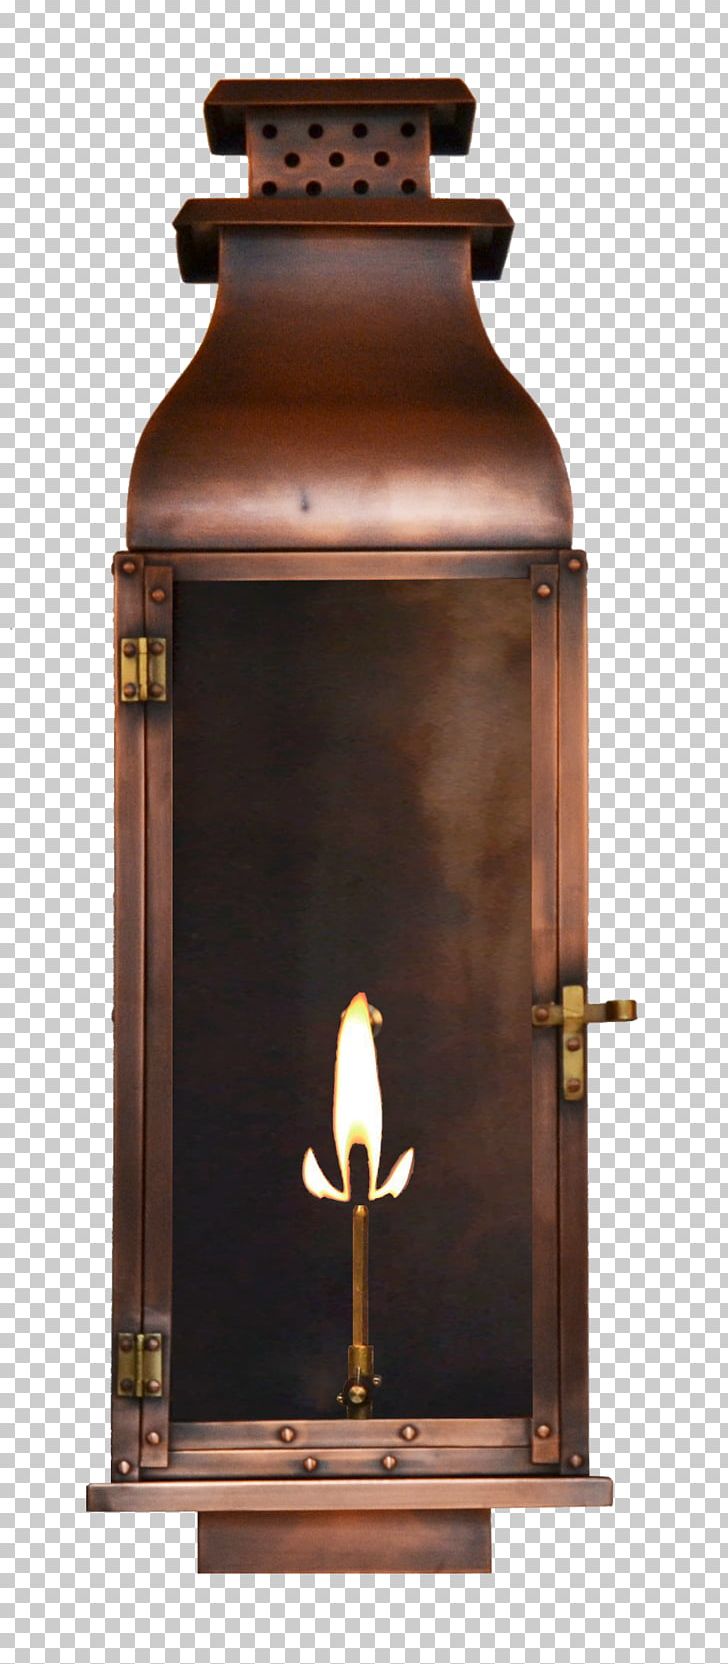 Gas Lighting Lantern Light Fixture PNG, Clipart, Candle, Ceiling Fixture, Chandelier, Copper, Coppersmith Free PNG Download